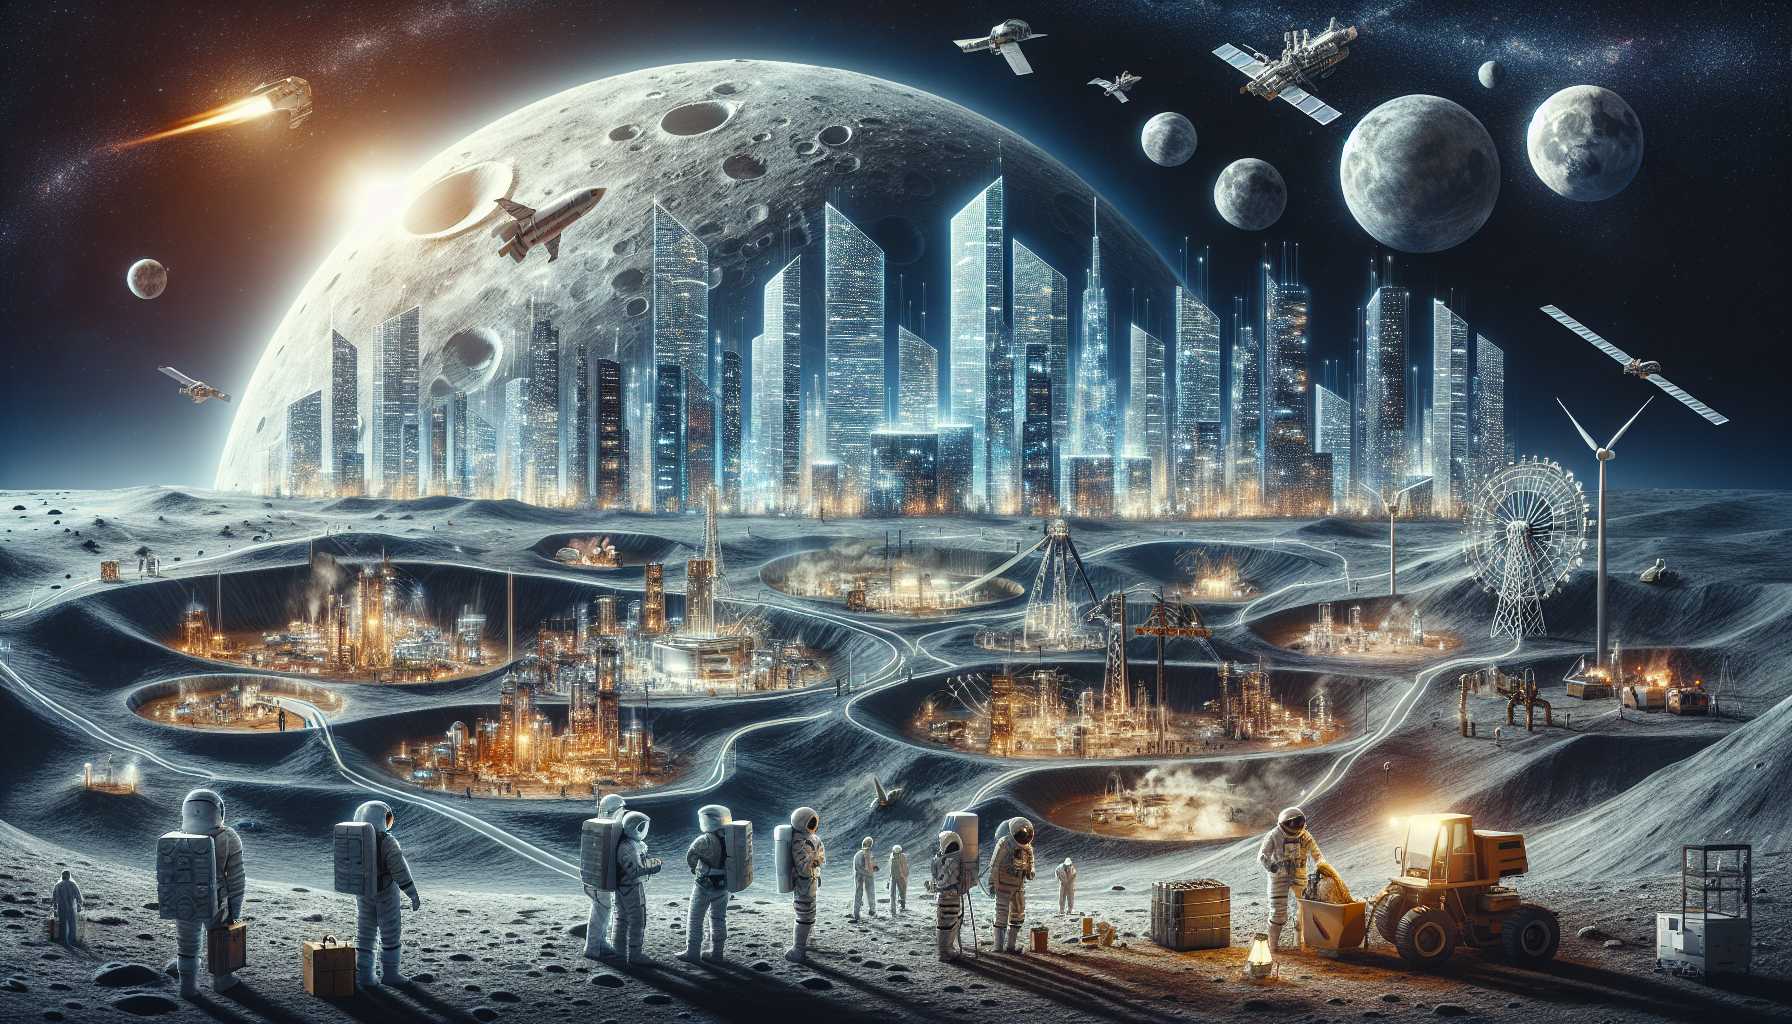 Artistic representation of future lunar economy and infrastructure